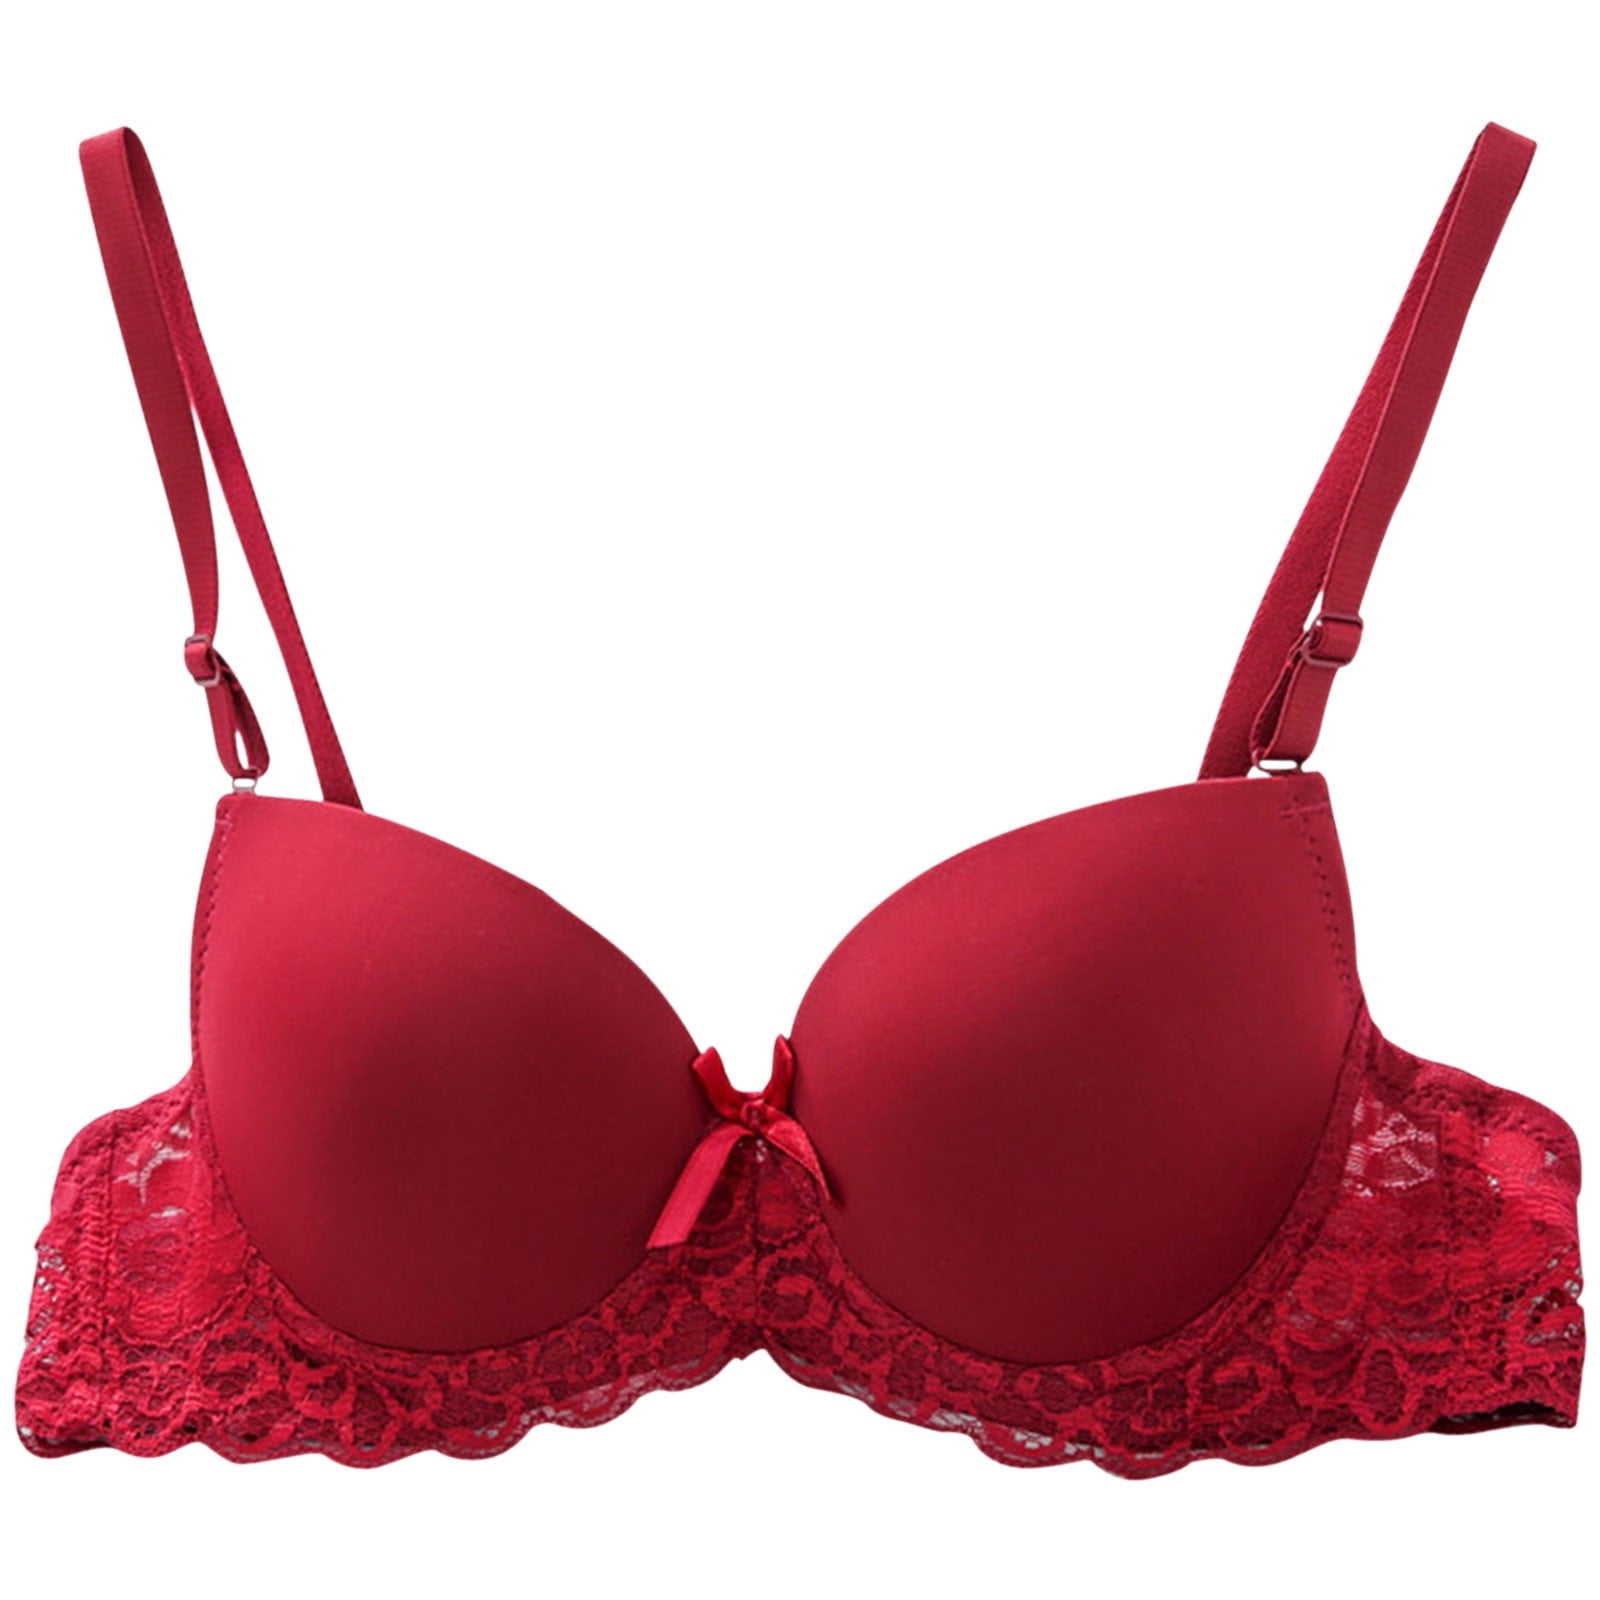 demys_boudoir - Bra size 36/80C available at 300Ksh. #clearancesale #25%off